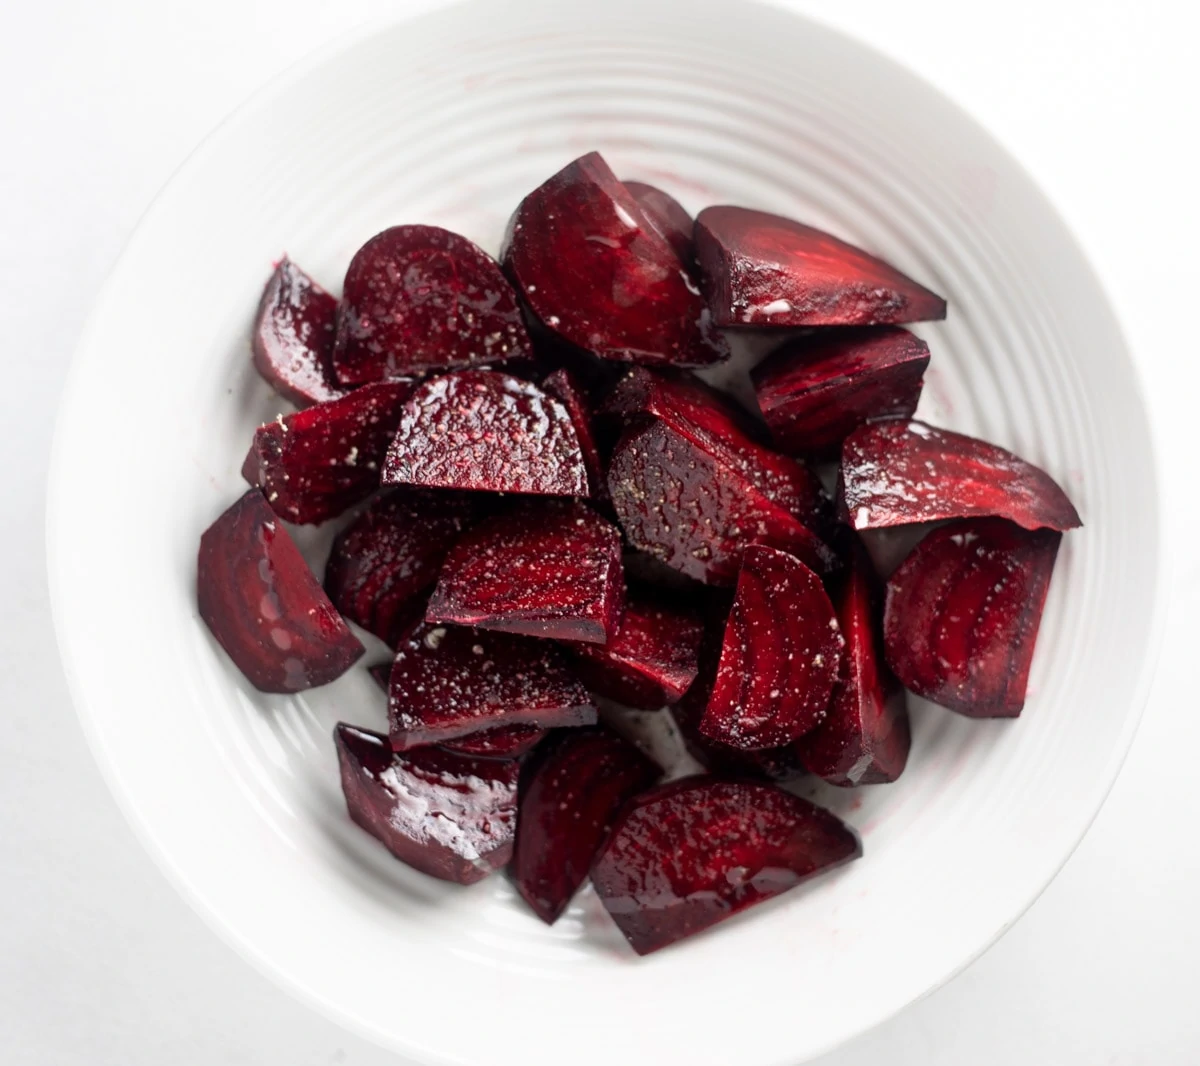 Beet quarters seasoned with oil and salt in a bowl